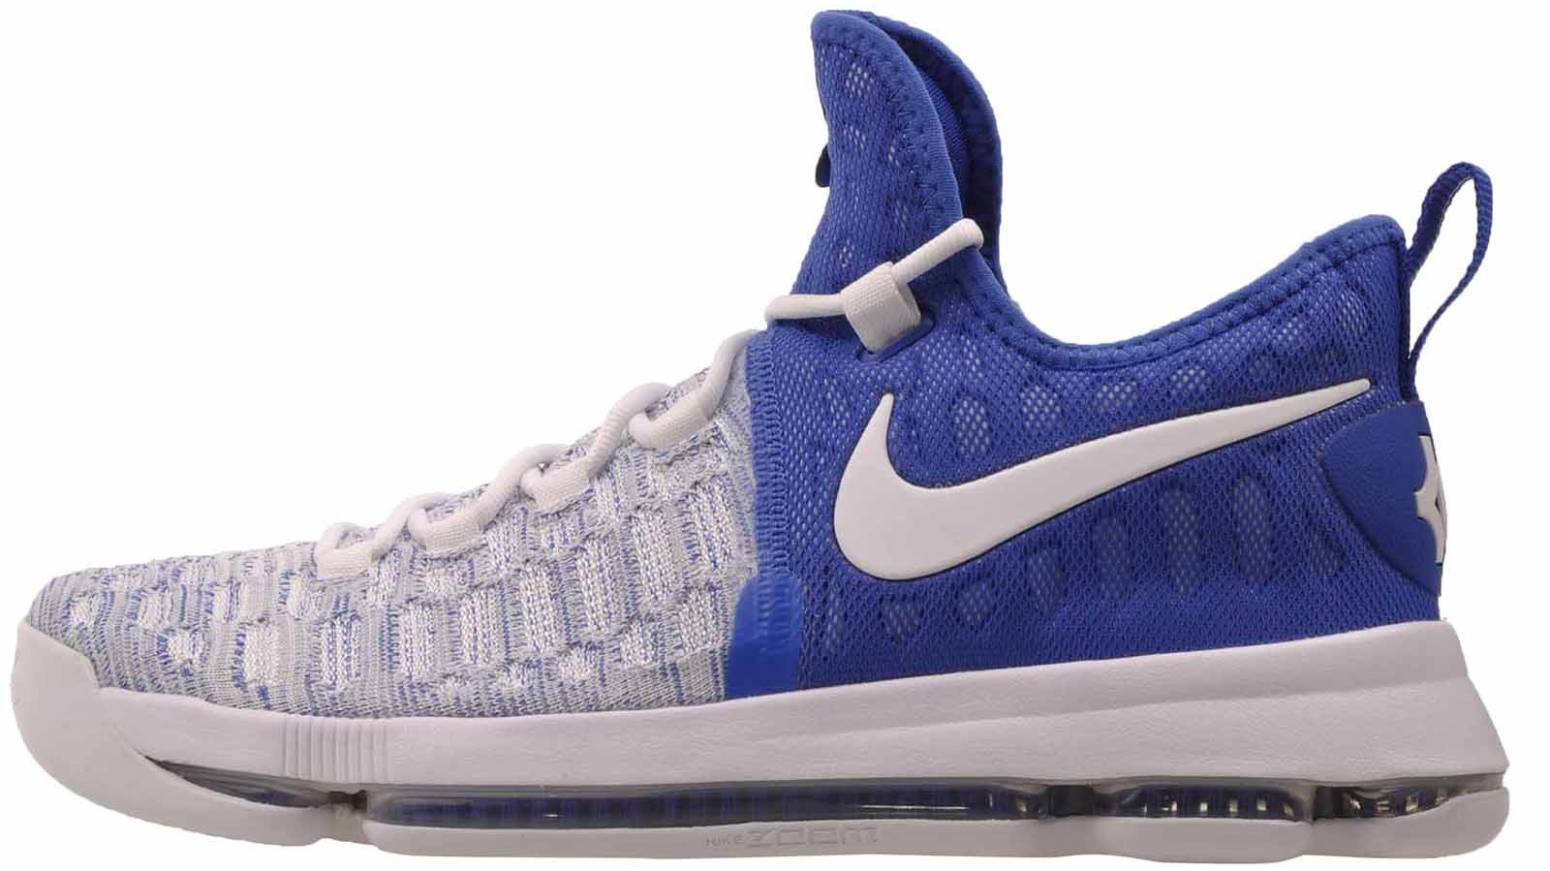 atleta Polvoriento clase Nike KD 9 Review 2022, Facts, Deals | RunRepeat